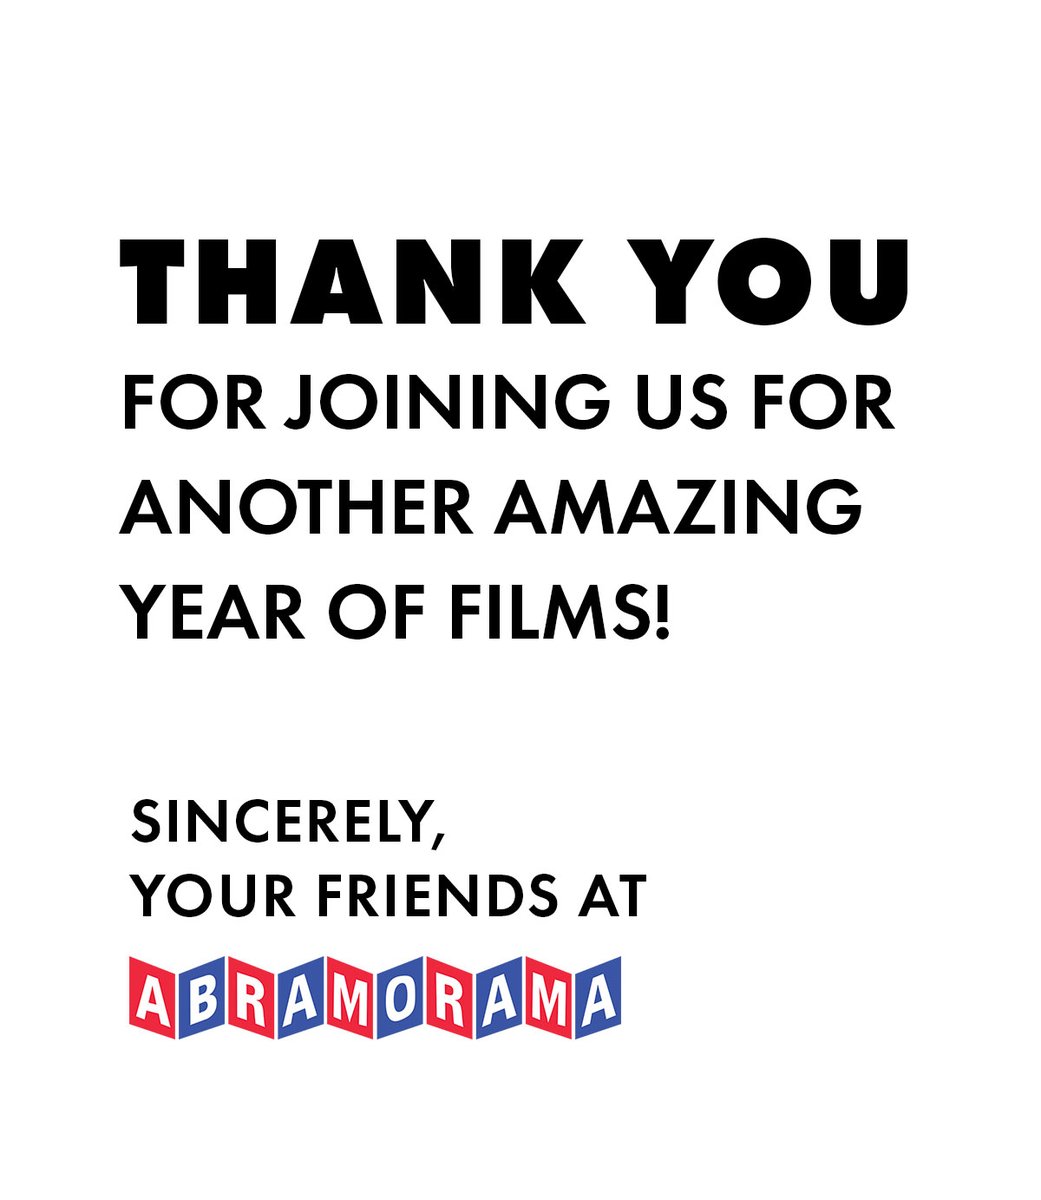 Thank you to everyone who supported our films this year. We’re so grateful to our partners and our audiences everywhere for showing up and lending their support. We couldn’t do this without you! Keep an eye out for exciting updates in 2024!